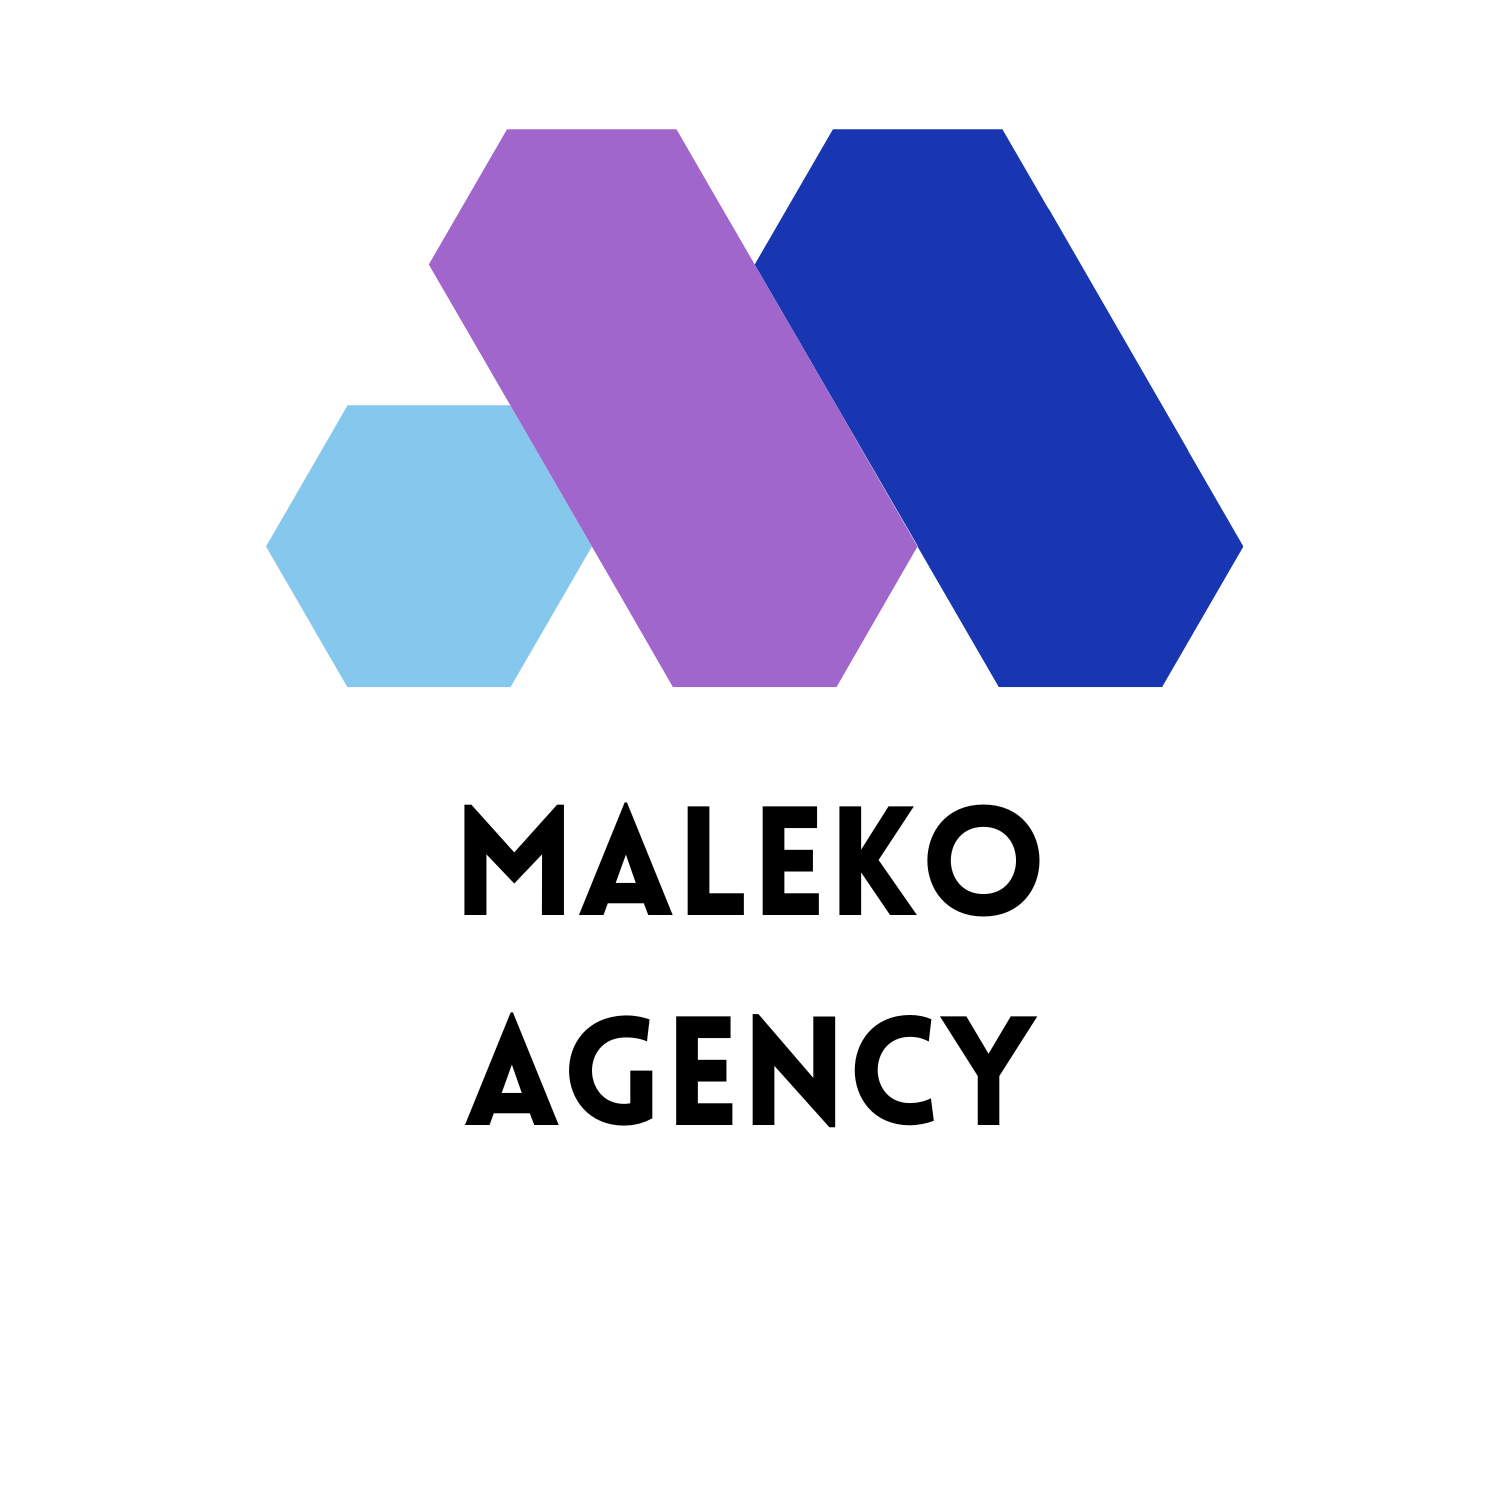 Get More Coupon Codes And Deals At Maleko Agency